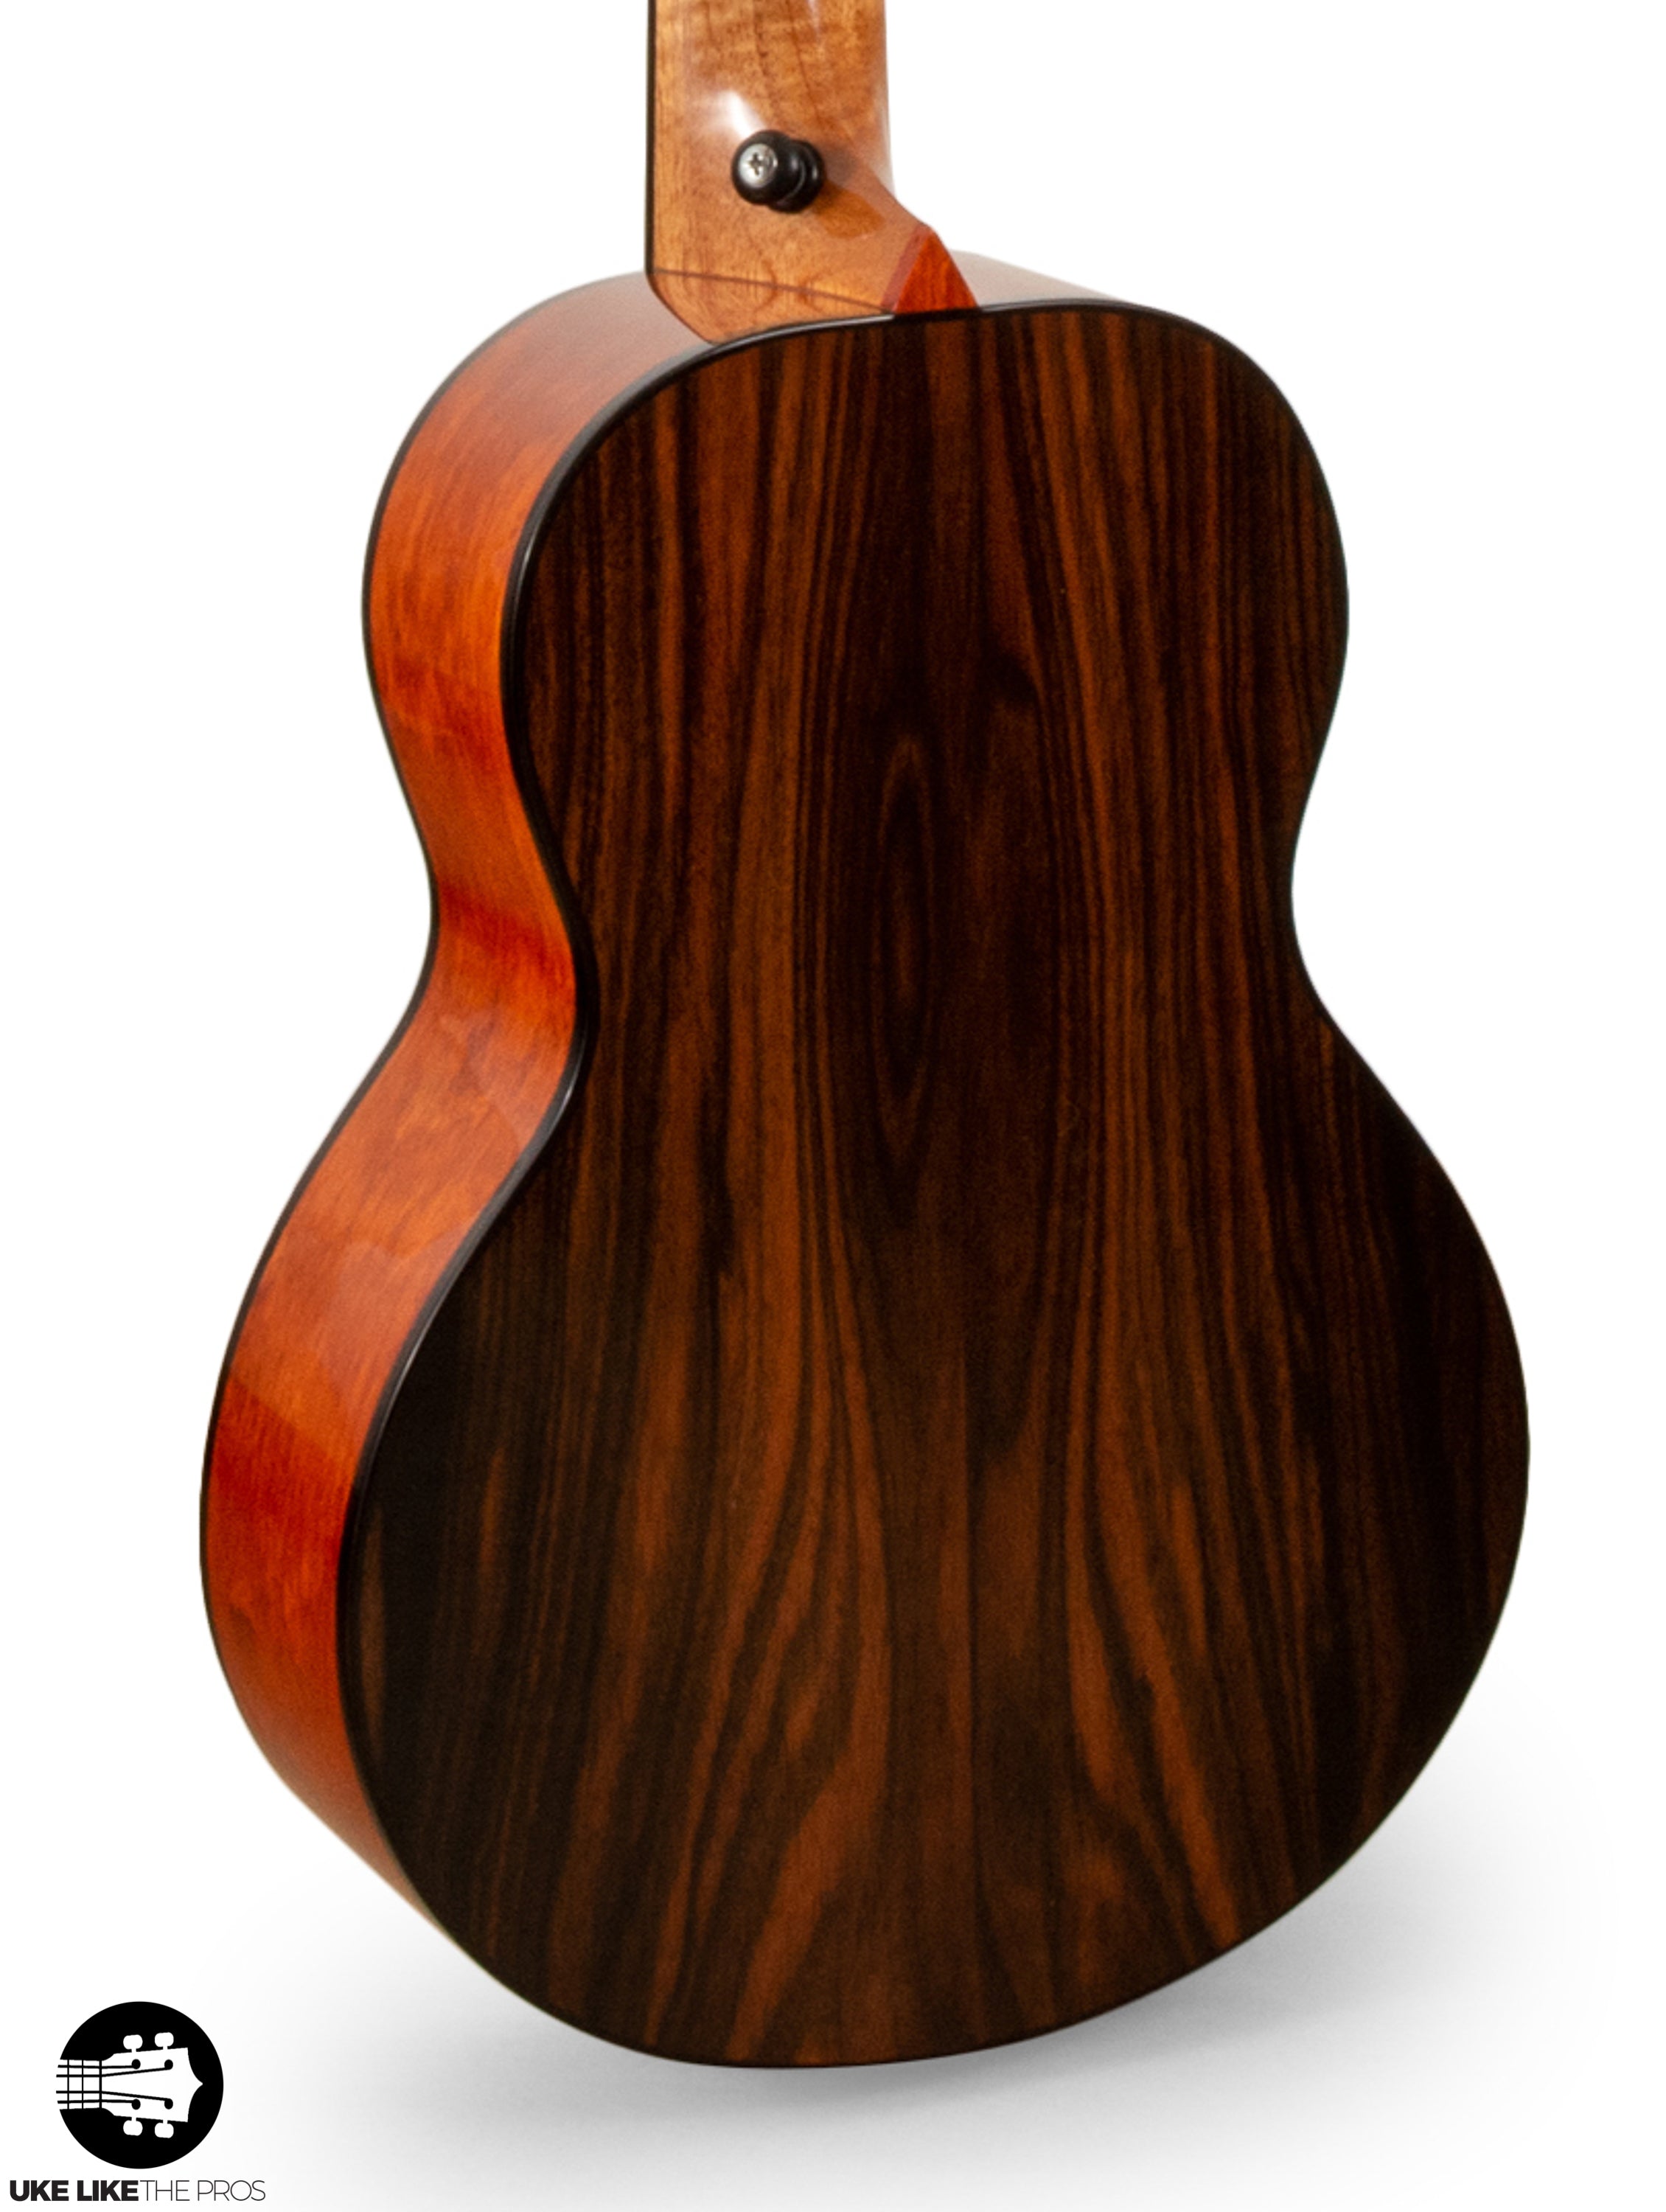 [DISCOUNTED] UPGRADED Rebel New Particle Tenor Ukulele Solid Cedar/Spruce "Aech" ONLY 10 MADE